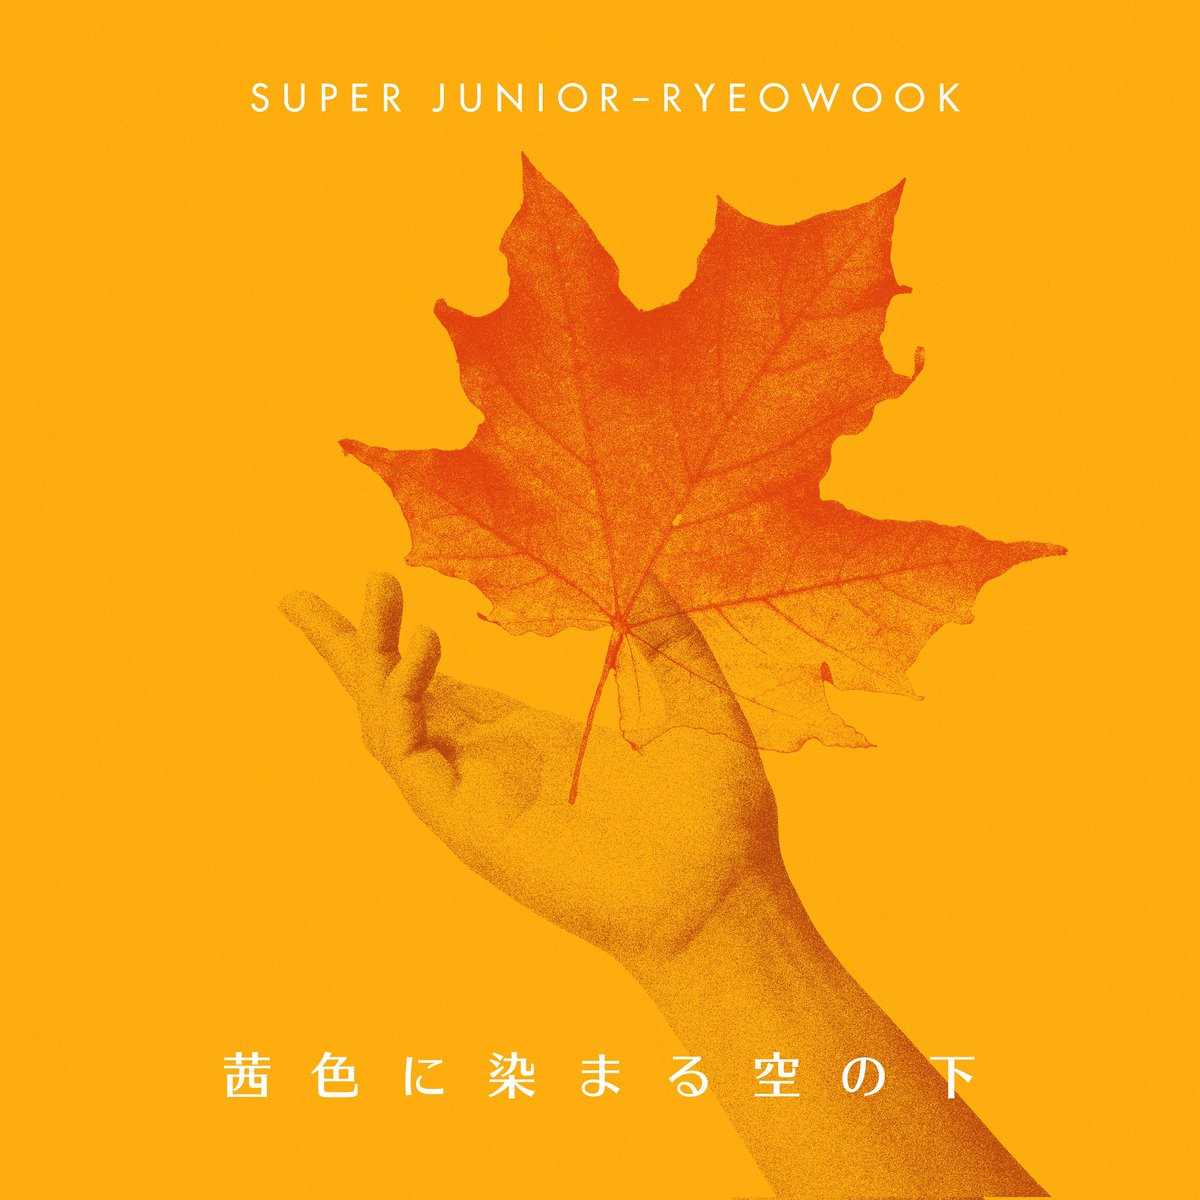 Image for 📰 Ryeowook, Japanese original single release after 3 years → Special live held https://t.co/5M9LgFFzlB Super Junior SUPERJUNIOR RYEOWOOK